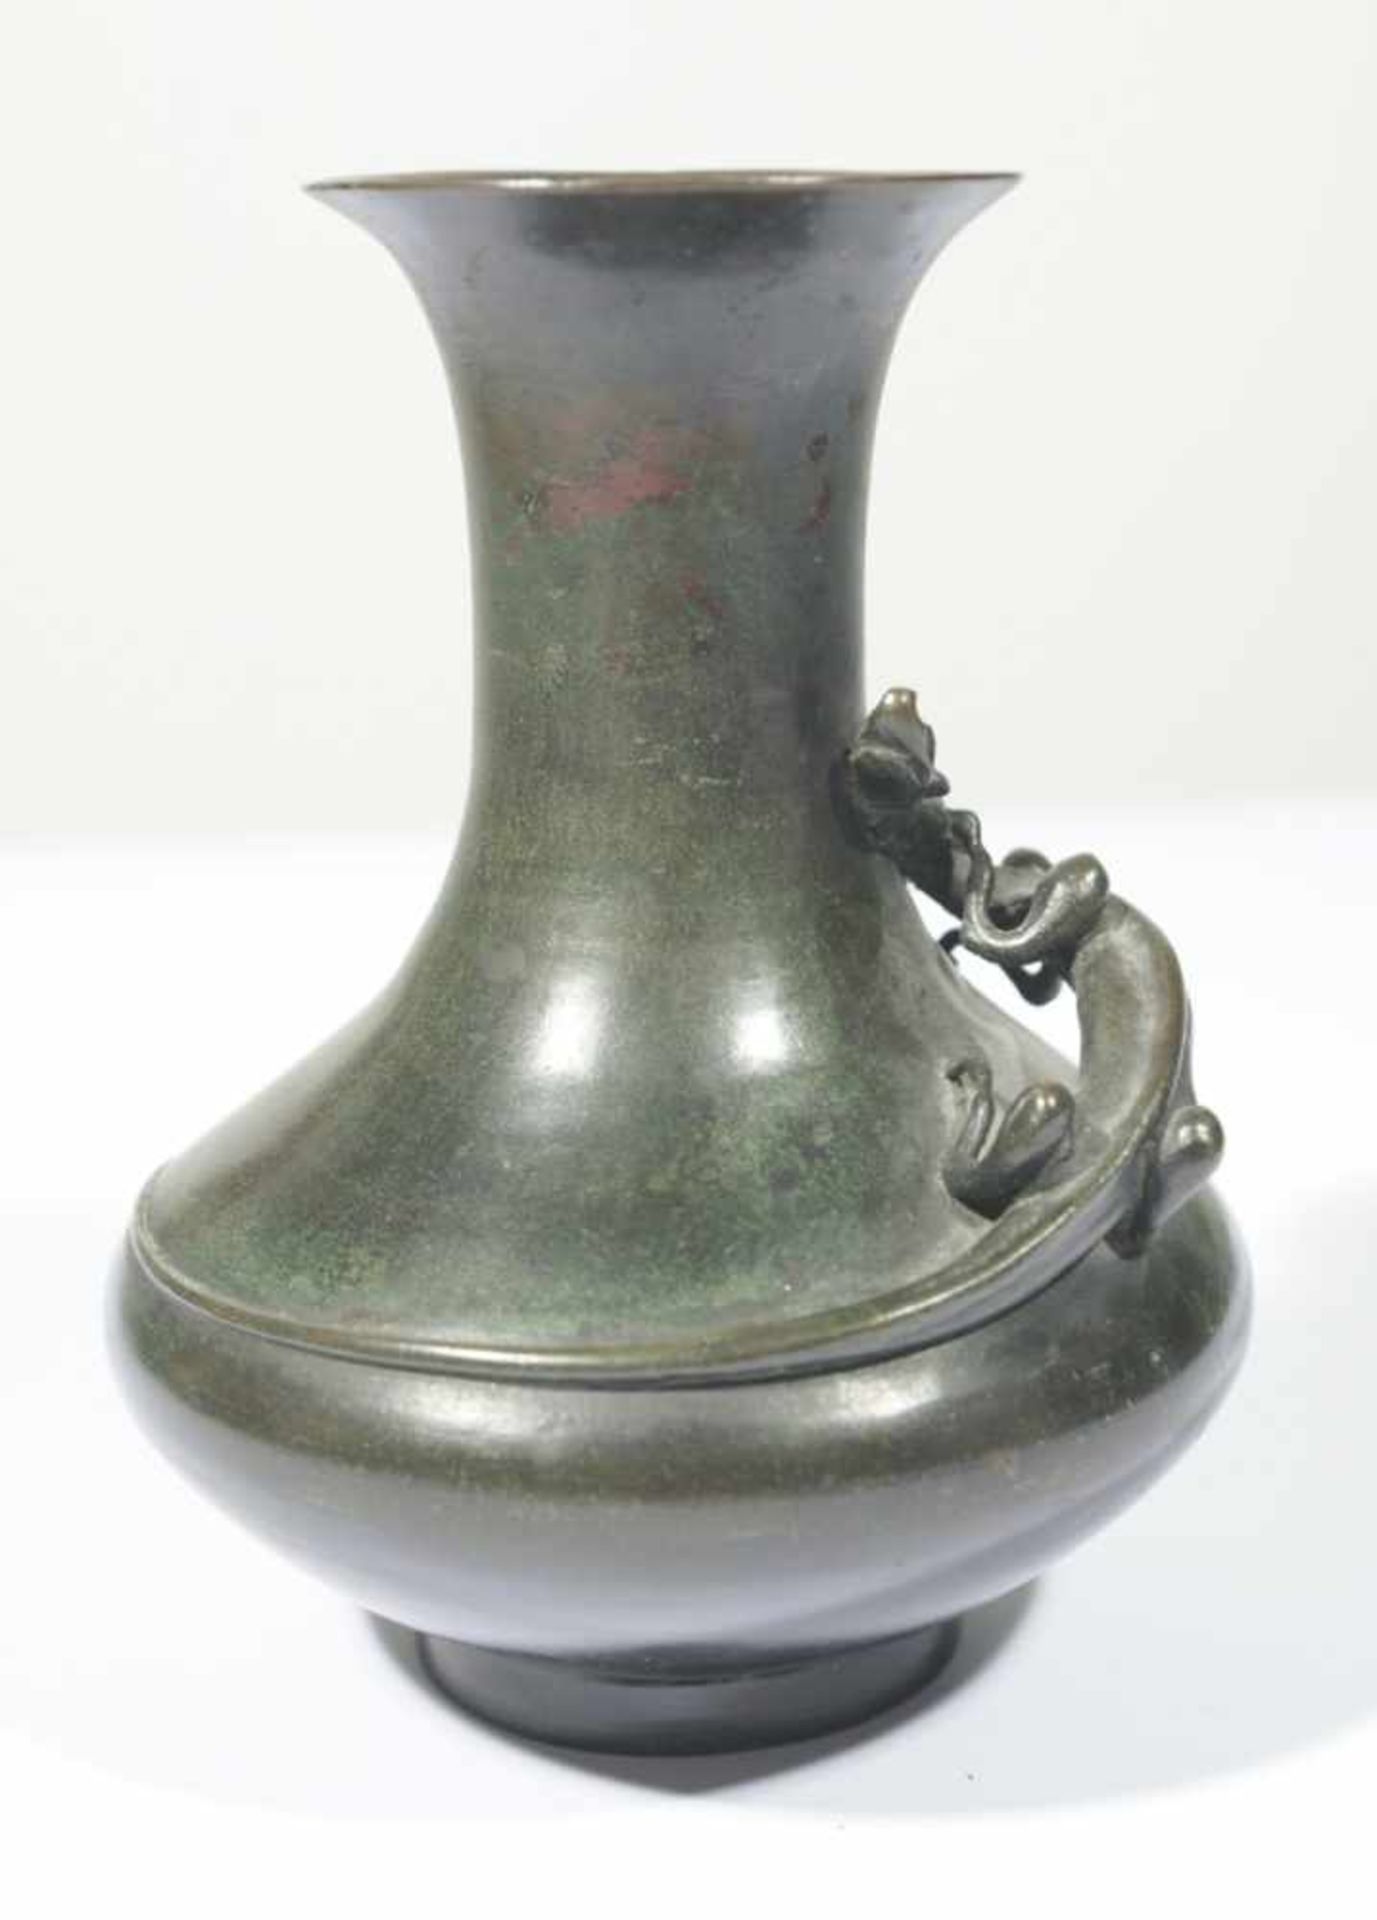 Large Japanese Chilong Vase, 19th c. or older, 24 cm high, Provenance: Private collection